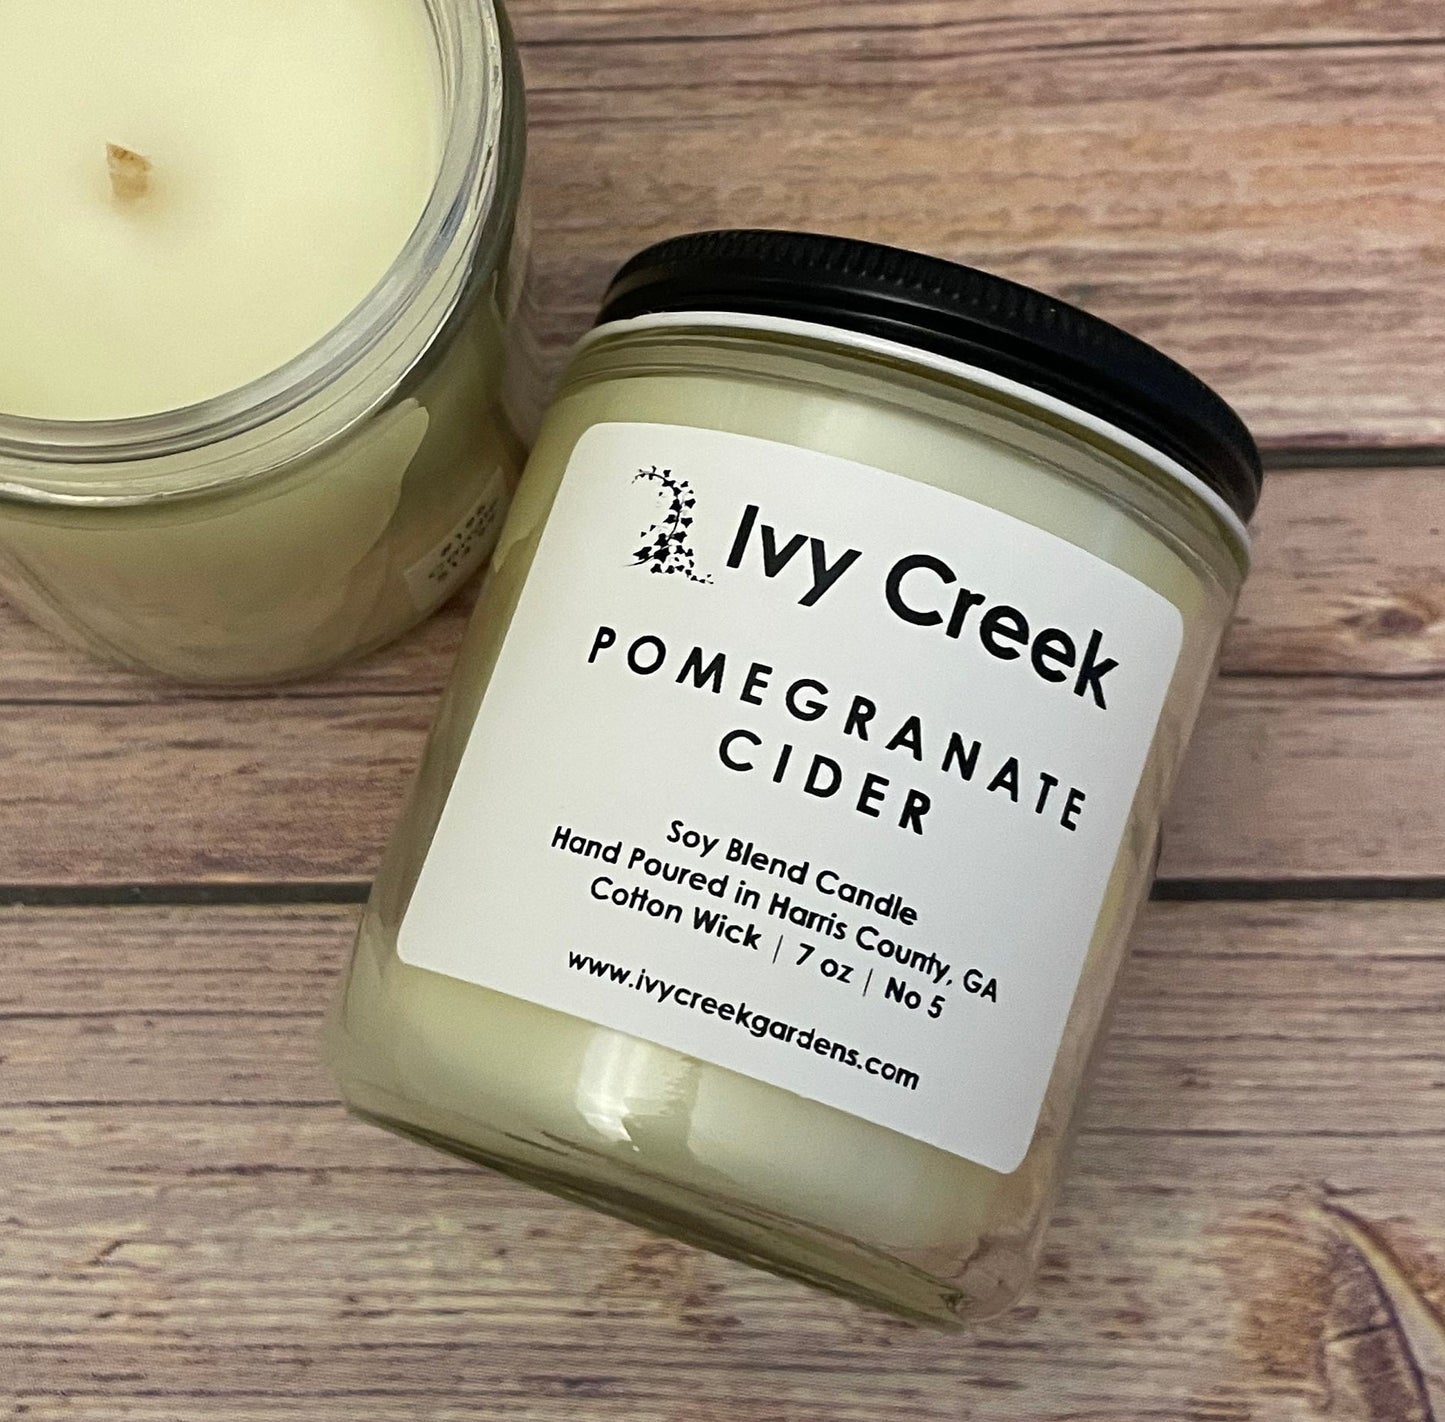 Ivy Creek No 5 | Pomegranate Cider Soy Blend Candle | Hand Poured | 7 oz | Cotton Wick | Small Batch | Clean Burning | Container Candle